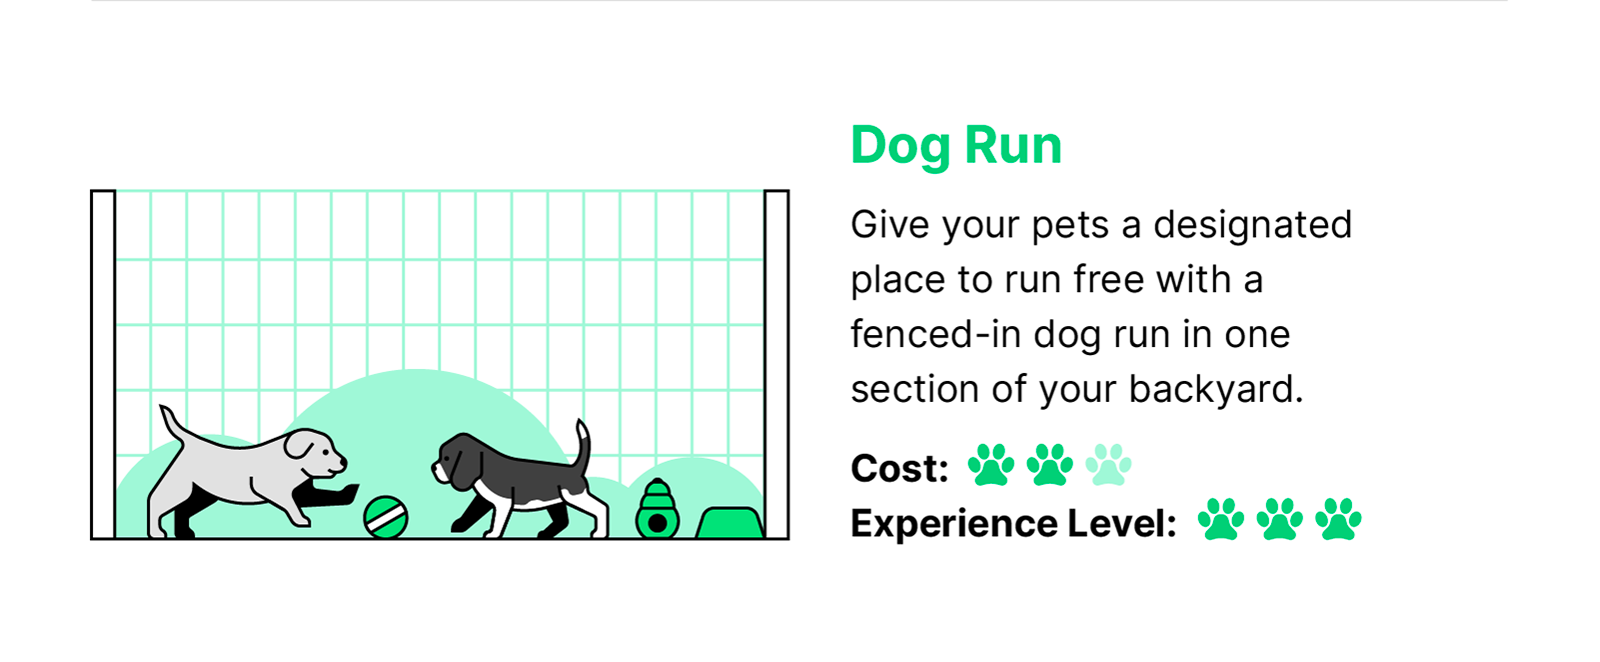 Green black and white illustration of two puppies playing with a ball inside a long dog run with text